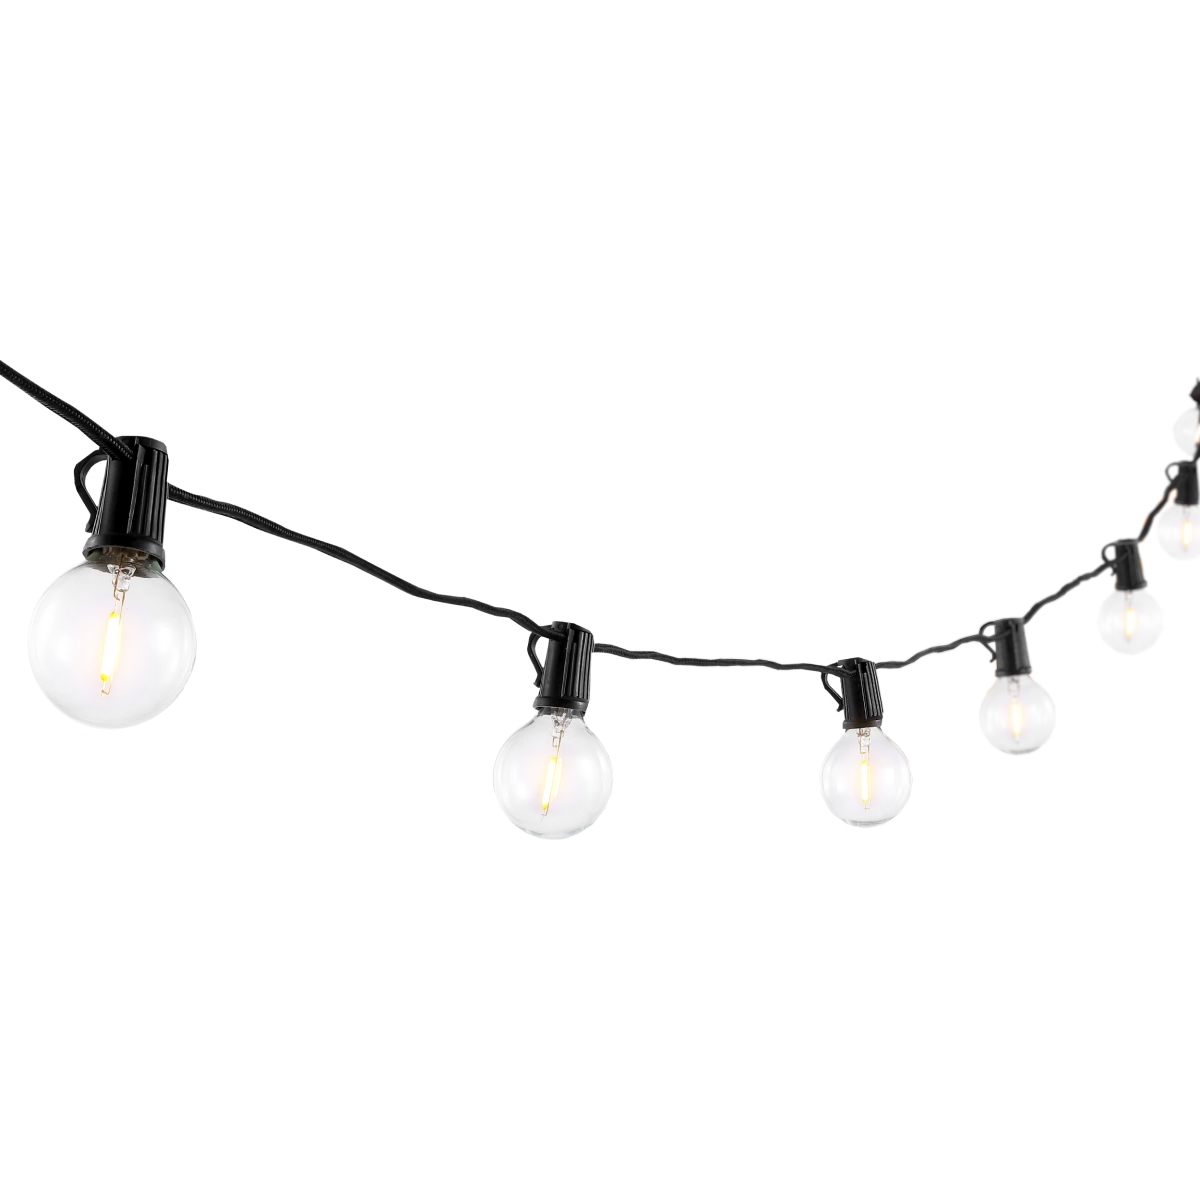 Picture of Safavieh PLT4041A Leigh LED Outdoor String Light, Black